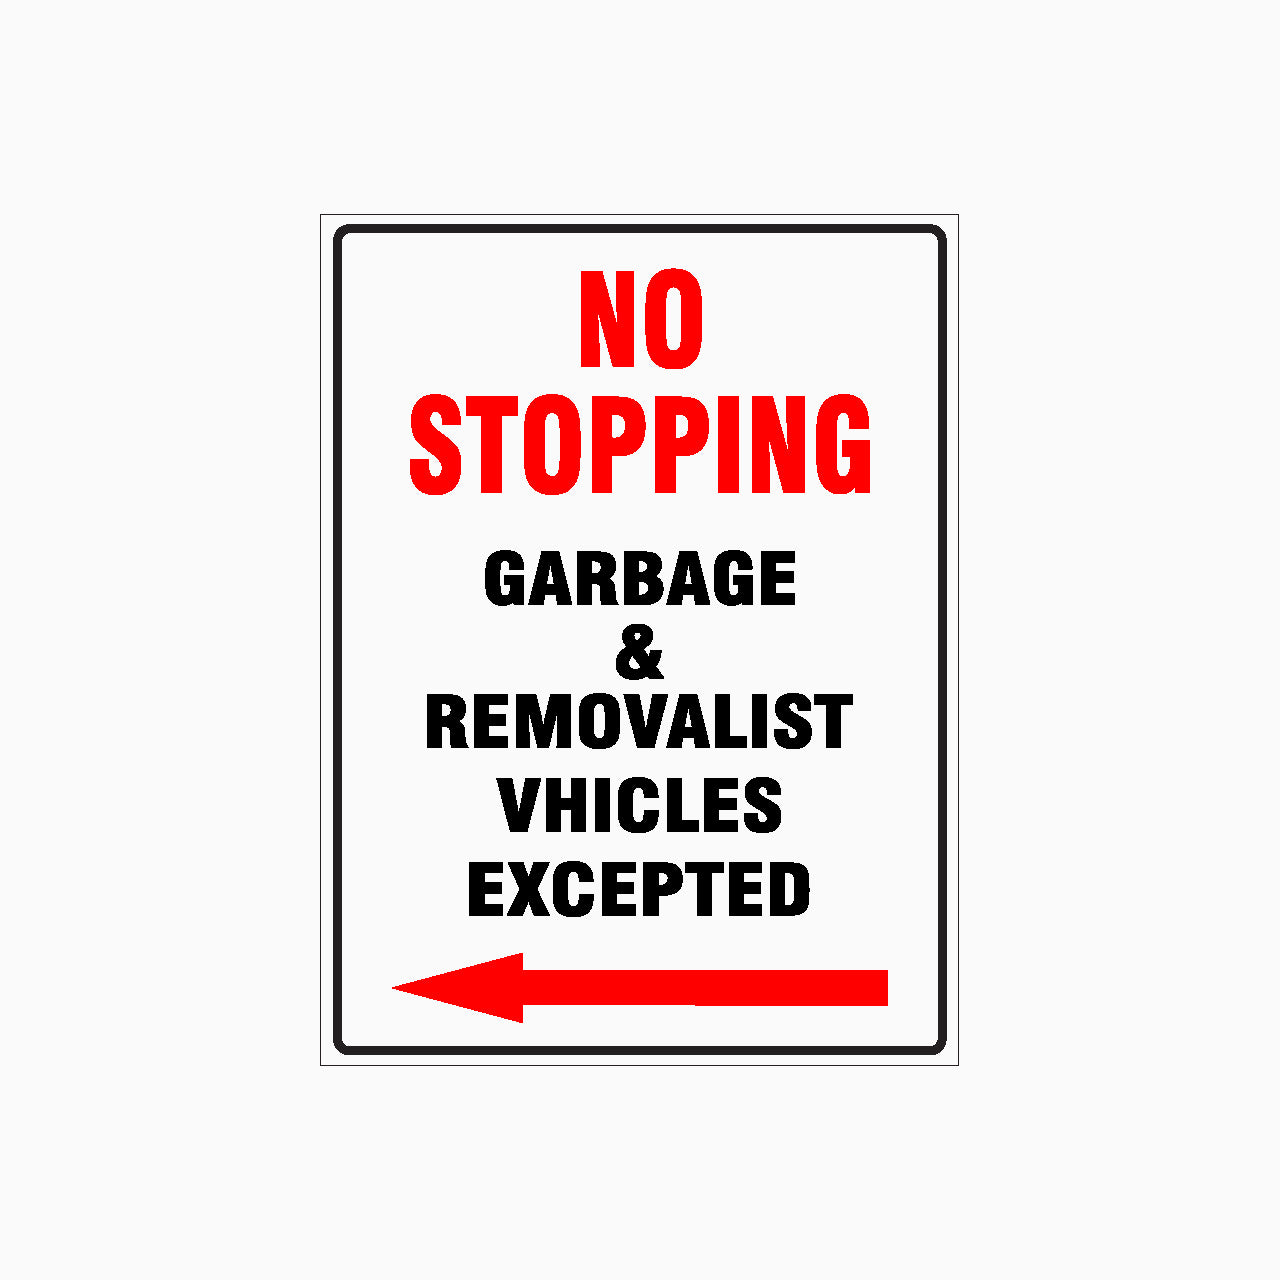 NO STOPPING SIGN - GARBAGE & REMOVALIST VEHICLES EXCEPTED - LEFT ARROW SIGN